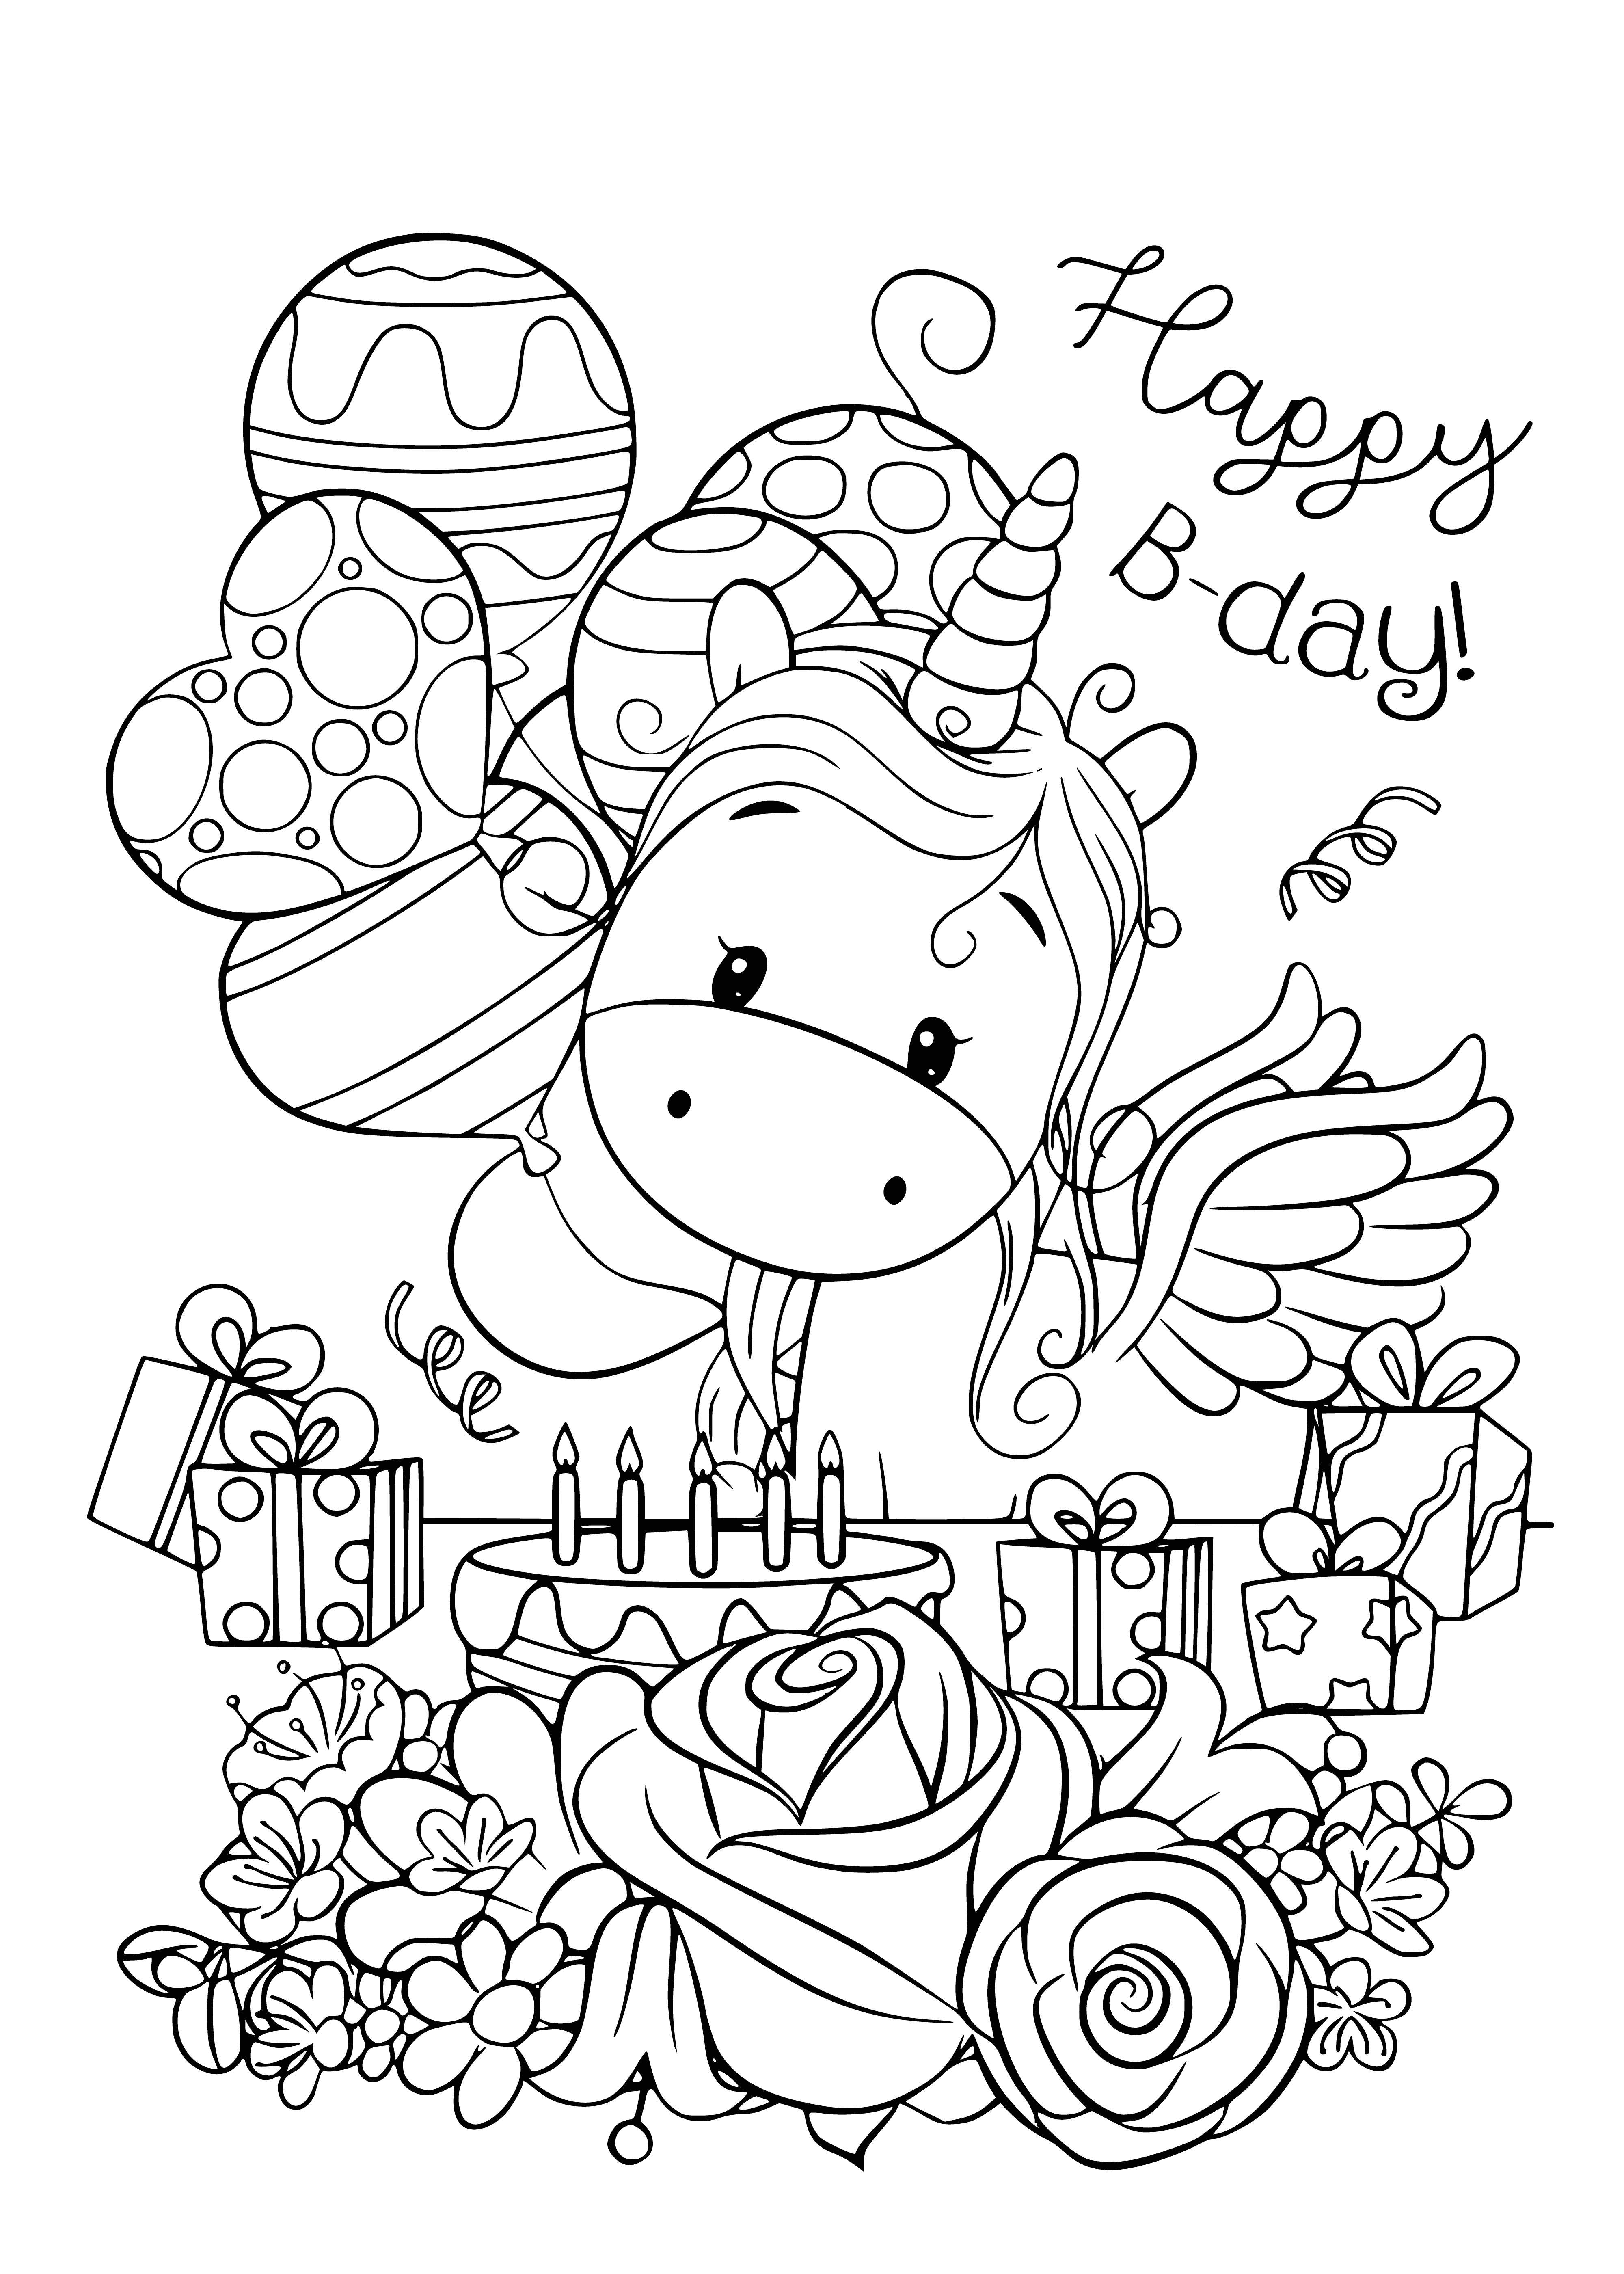 coloring page: Coloring page includes cute animals with birthday cakes, balloons, & presents - all colored in light & pastel colors.